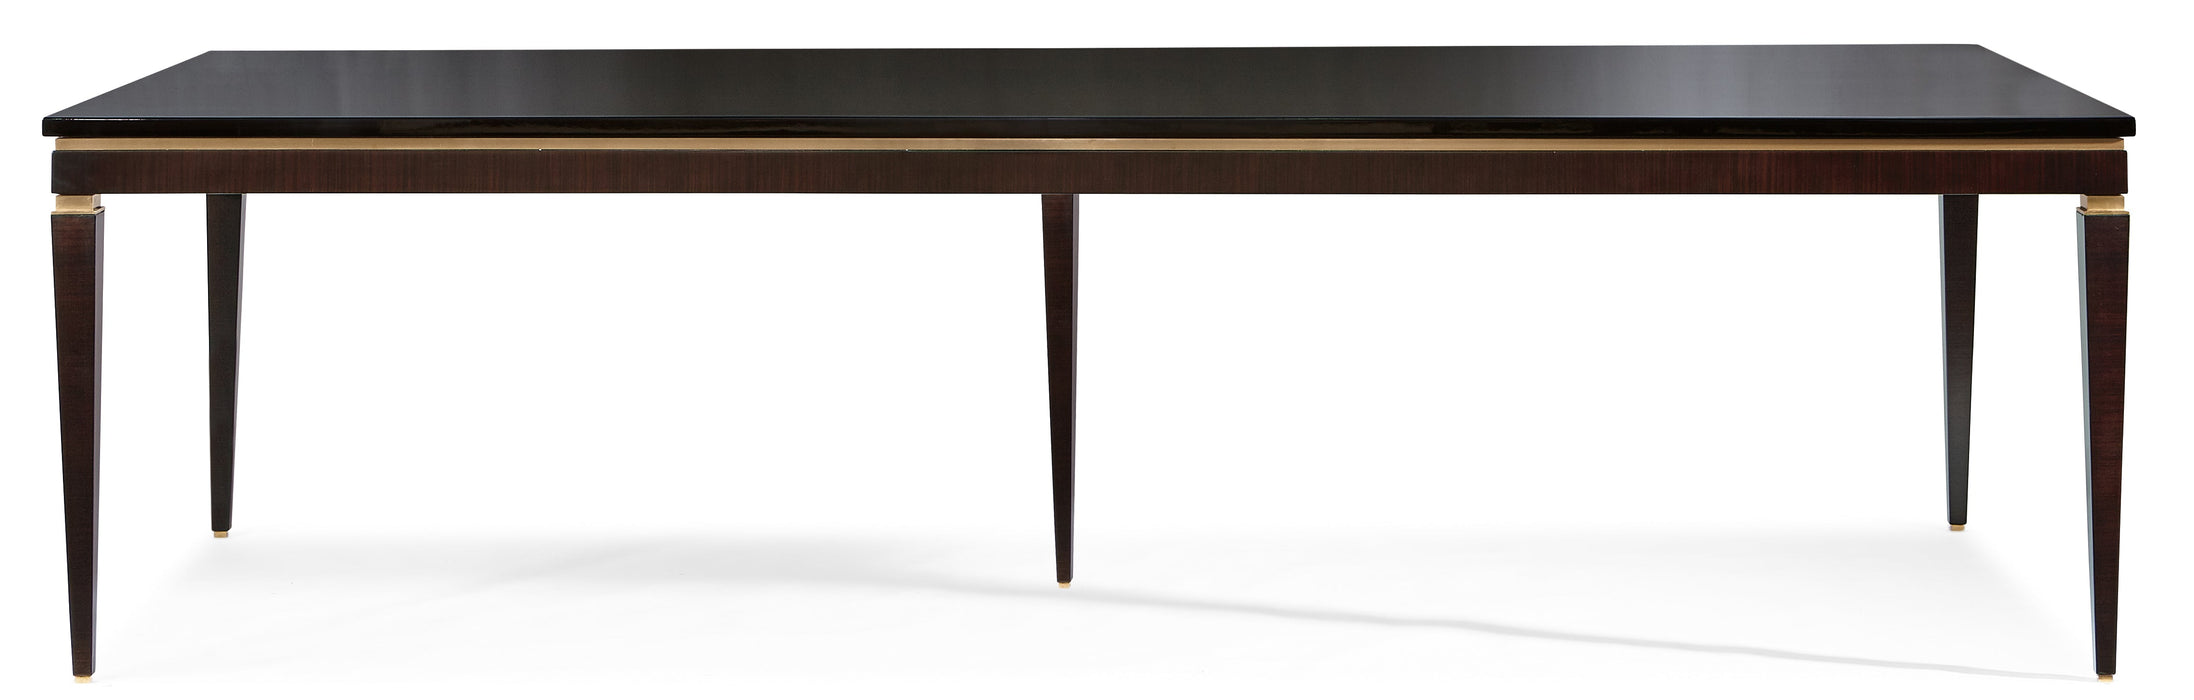 Caracole Urban Lifestyle Dining Table DSC